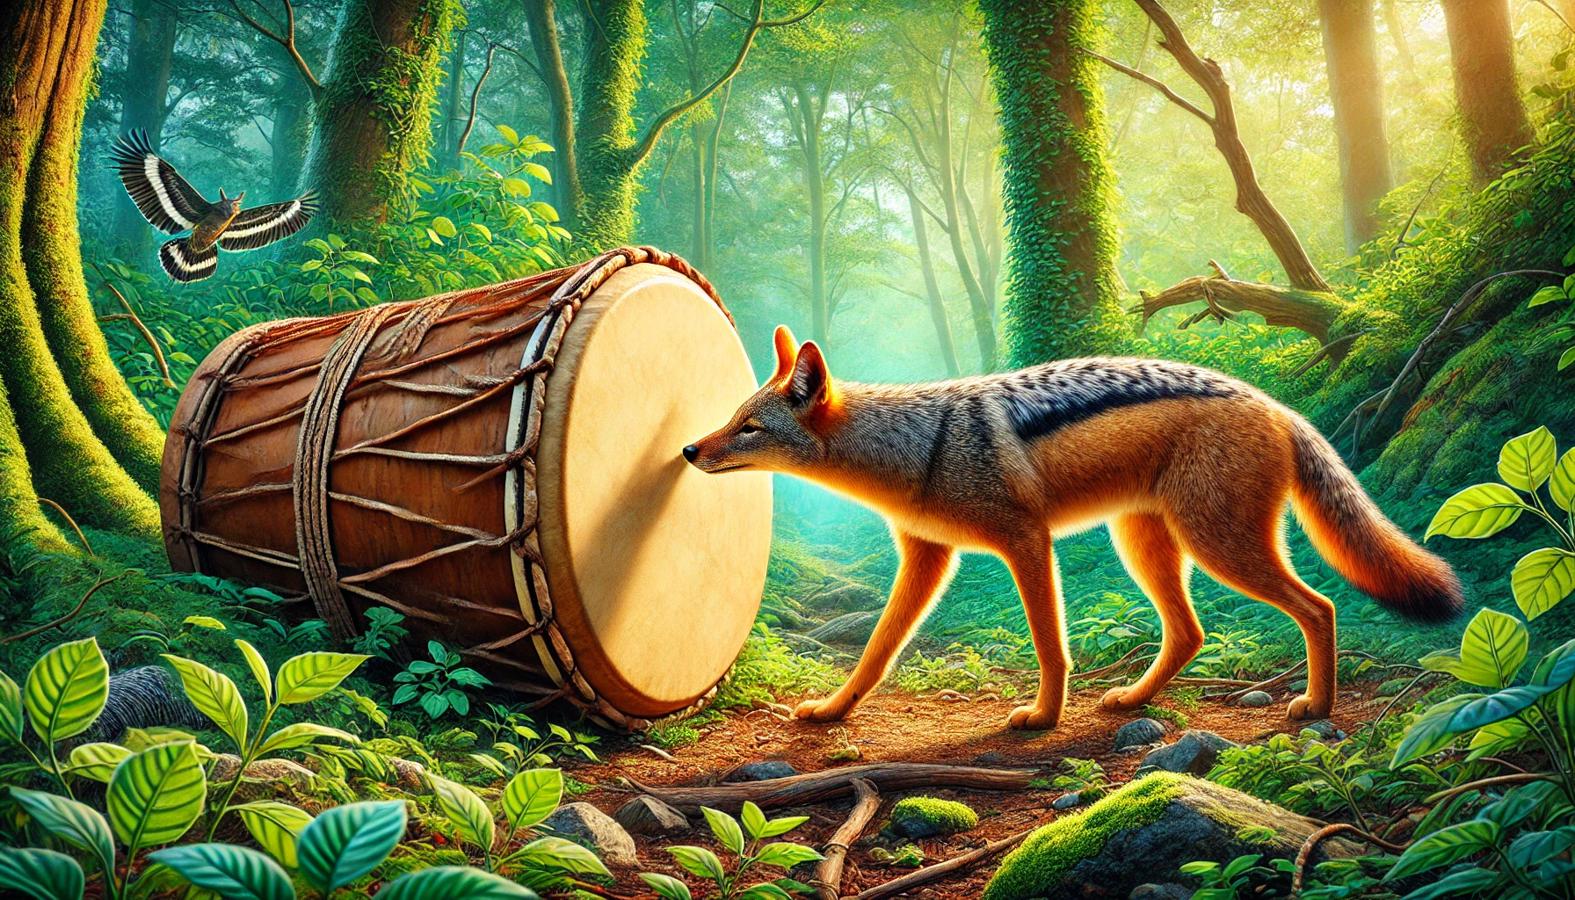 Jackal confidently approaching a drum in the forest, now understanding it.